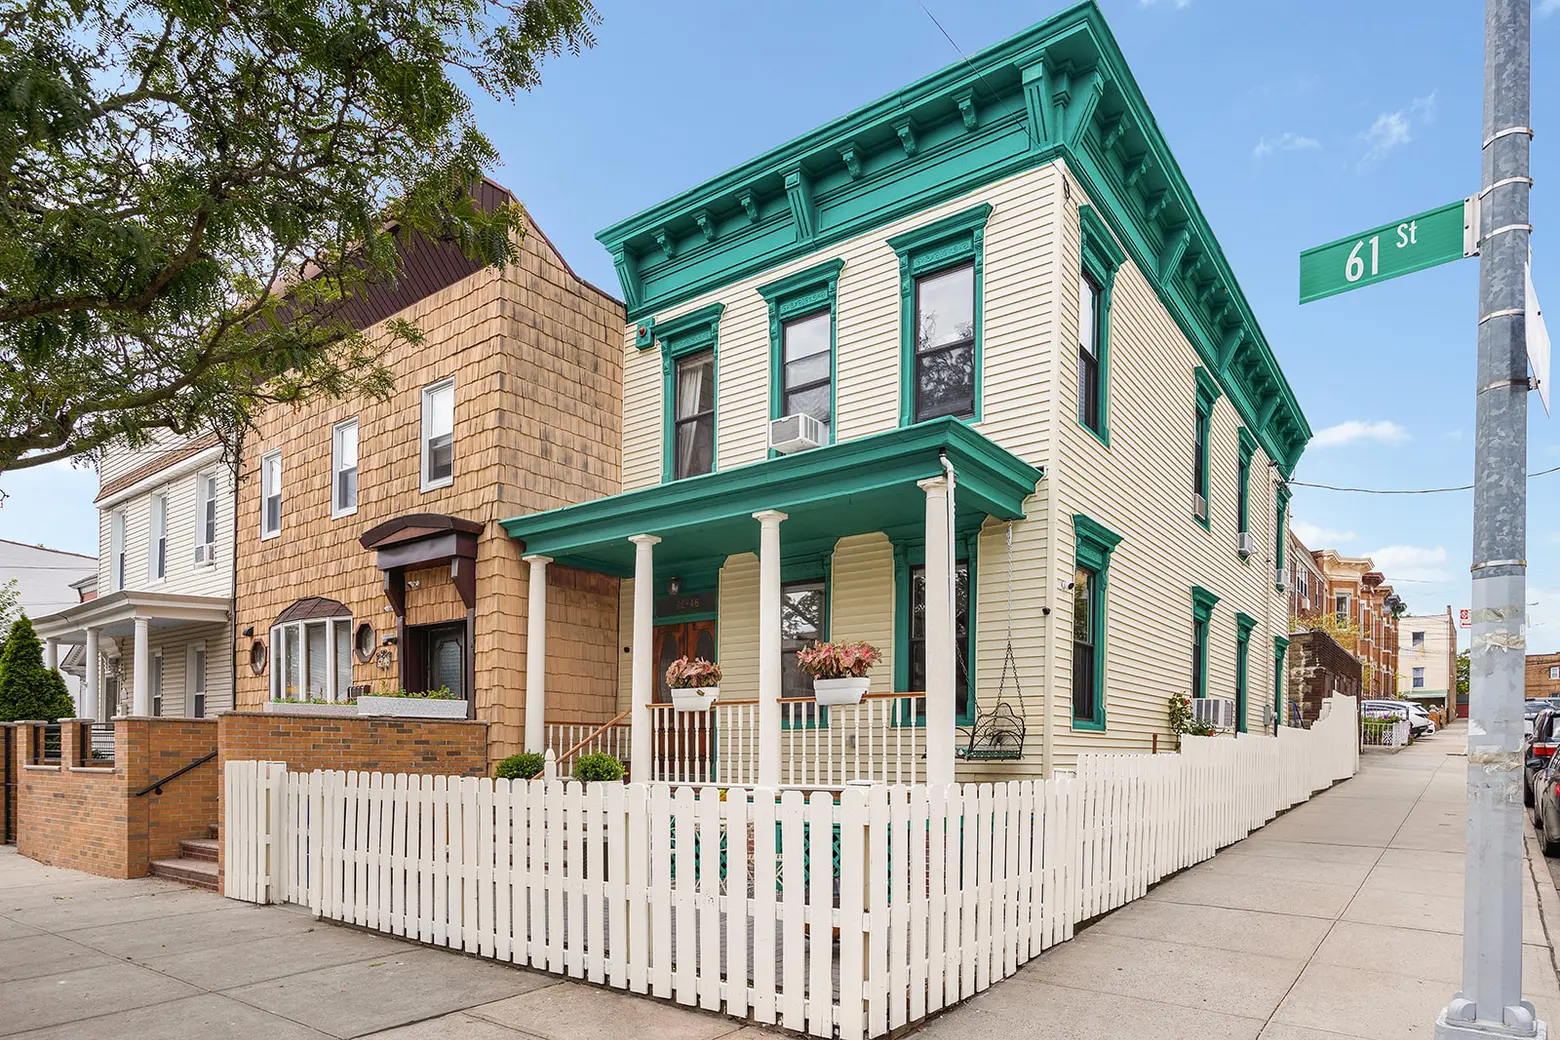 For $1.4M, this 1890s Ridgewood house has vintage charm, a front porch, and three garages